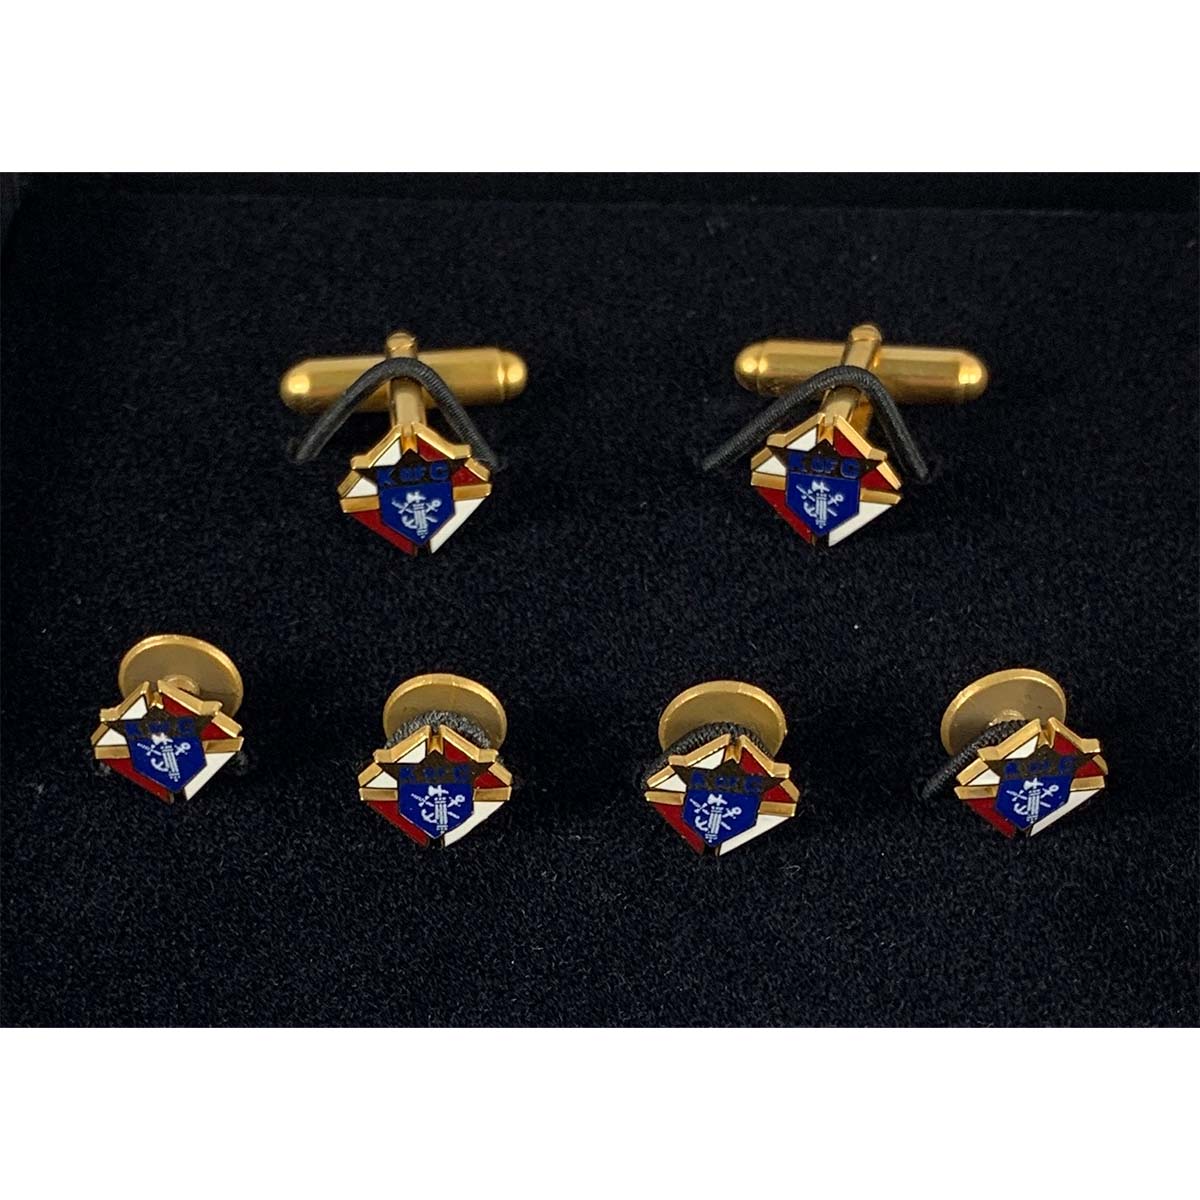 3rd Degree Cufflinks and Studs Gold Plated